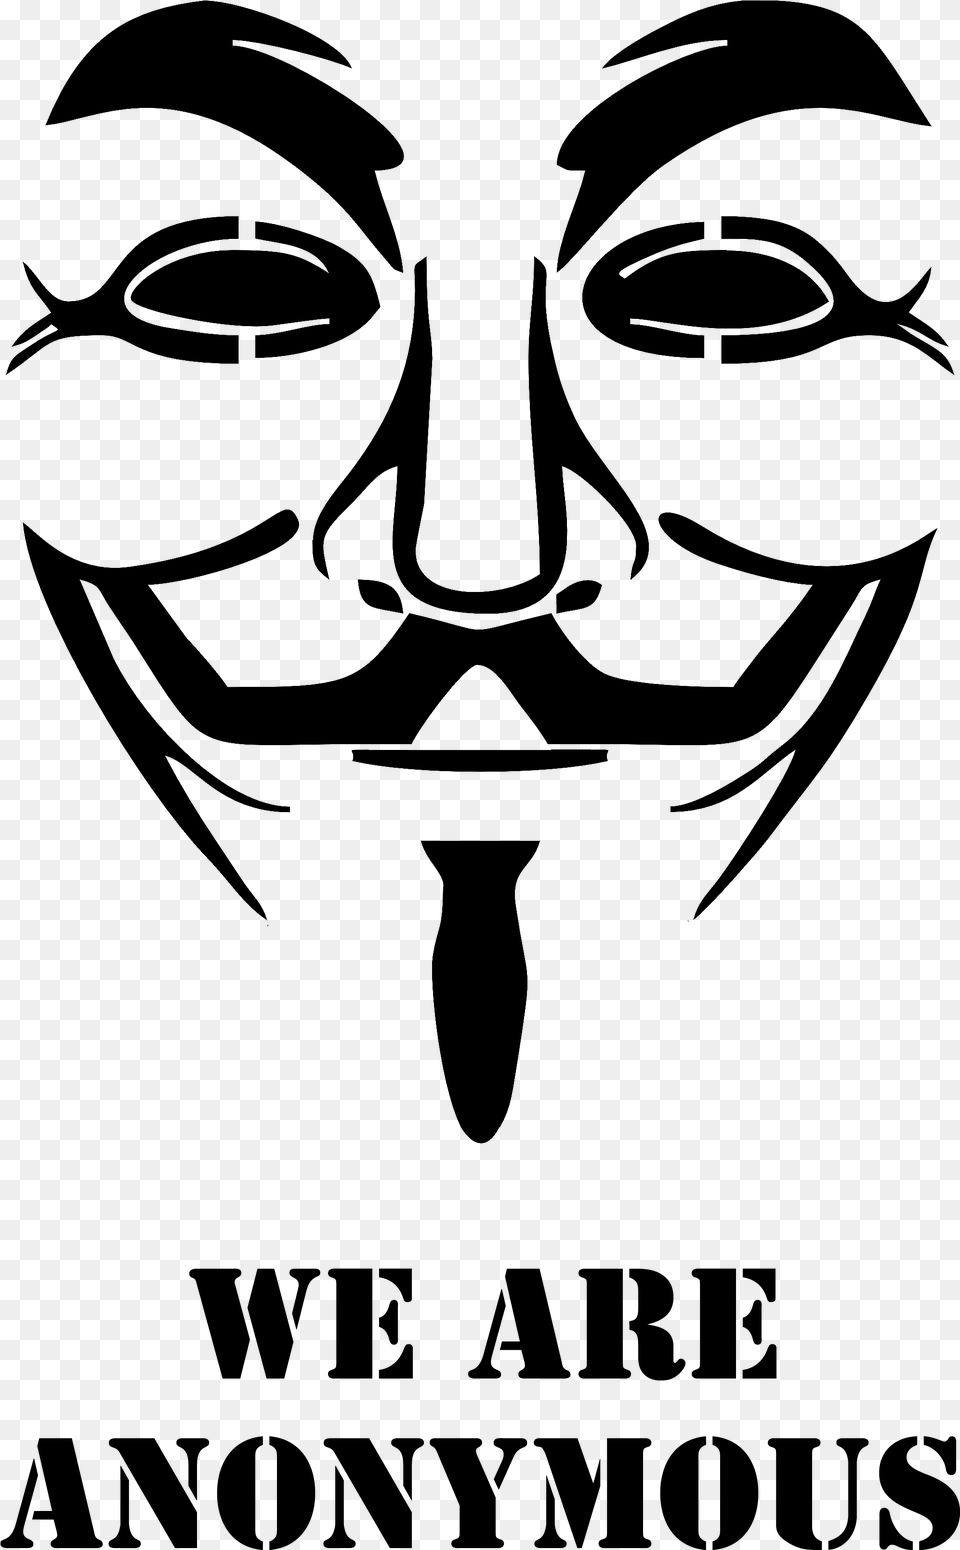 Anonymous Mask Pnganonymous Mask Anonymous Mask, Gray Free Png Download